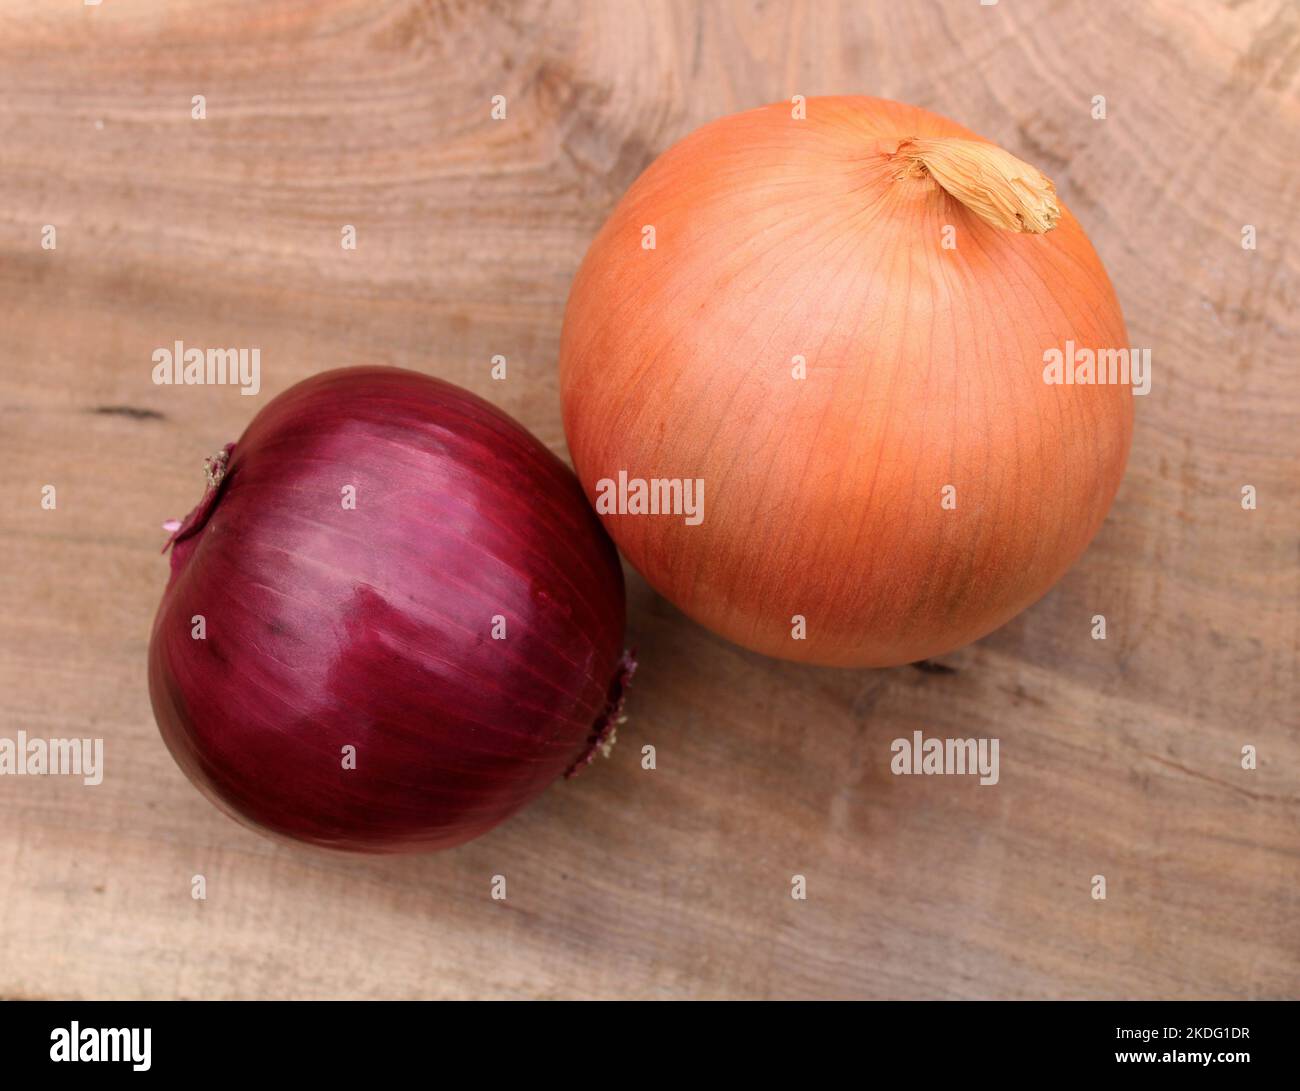 A Red and Yellow Onion on a Black Walnut Wood Background Stock Photo